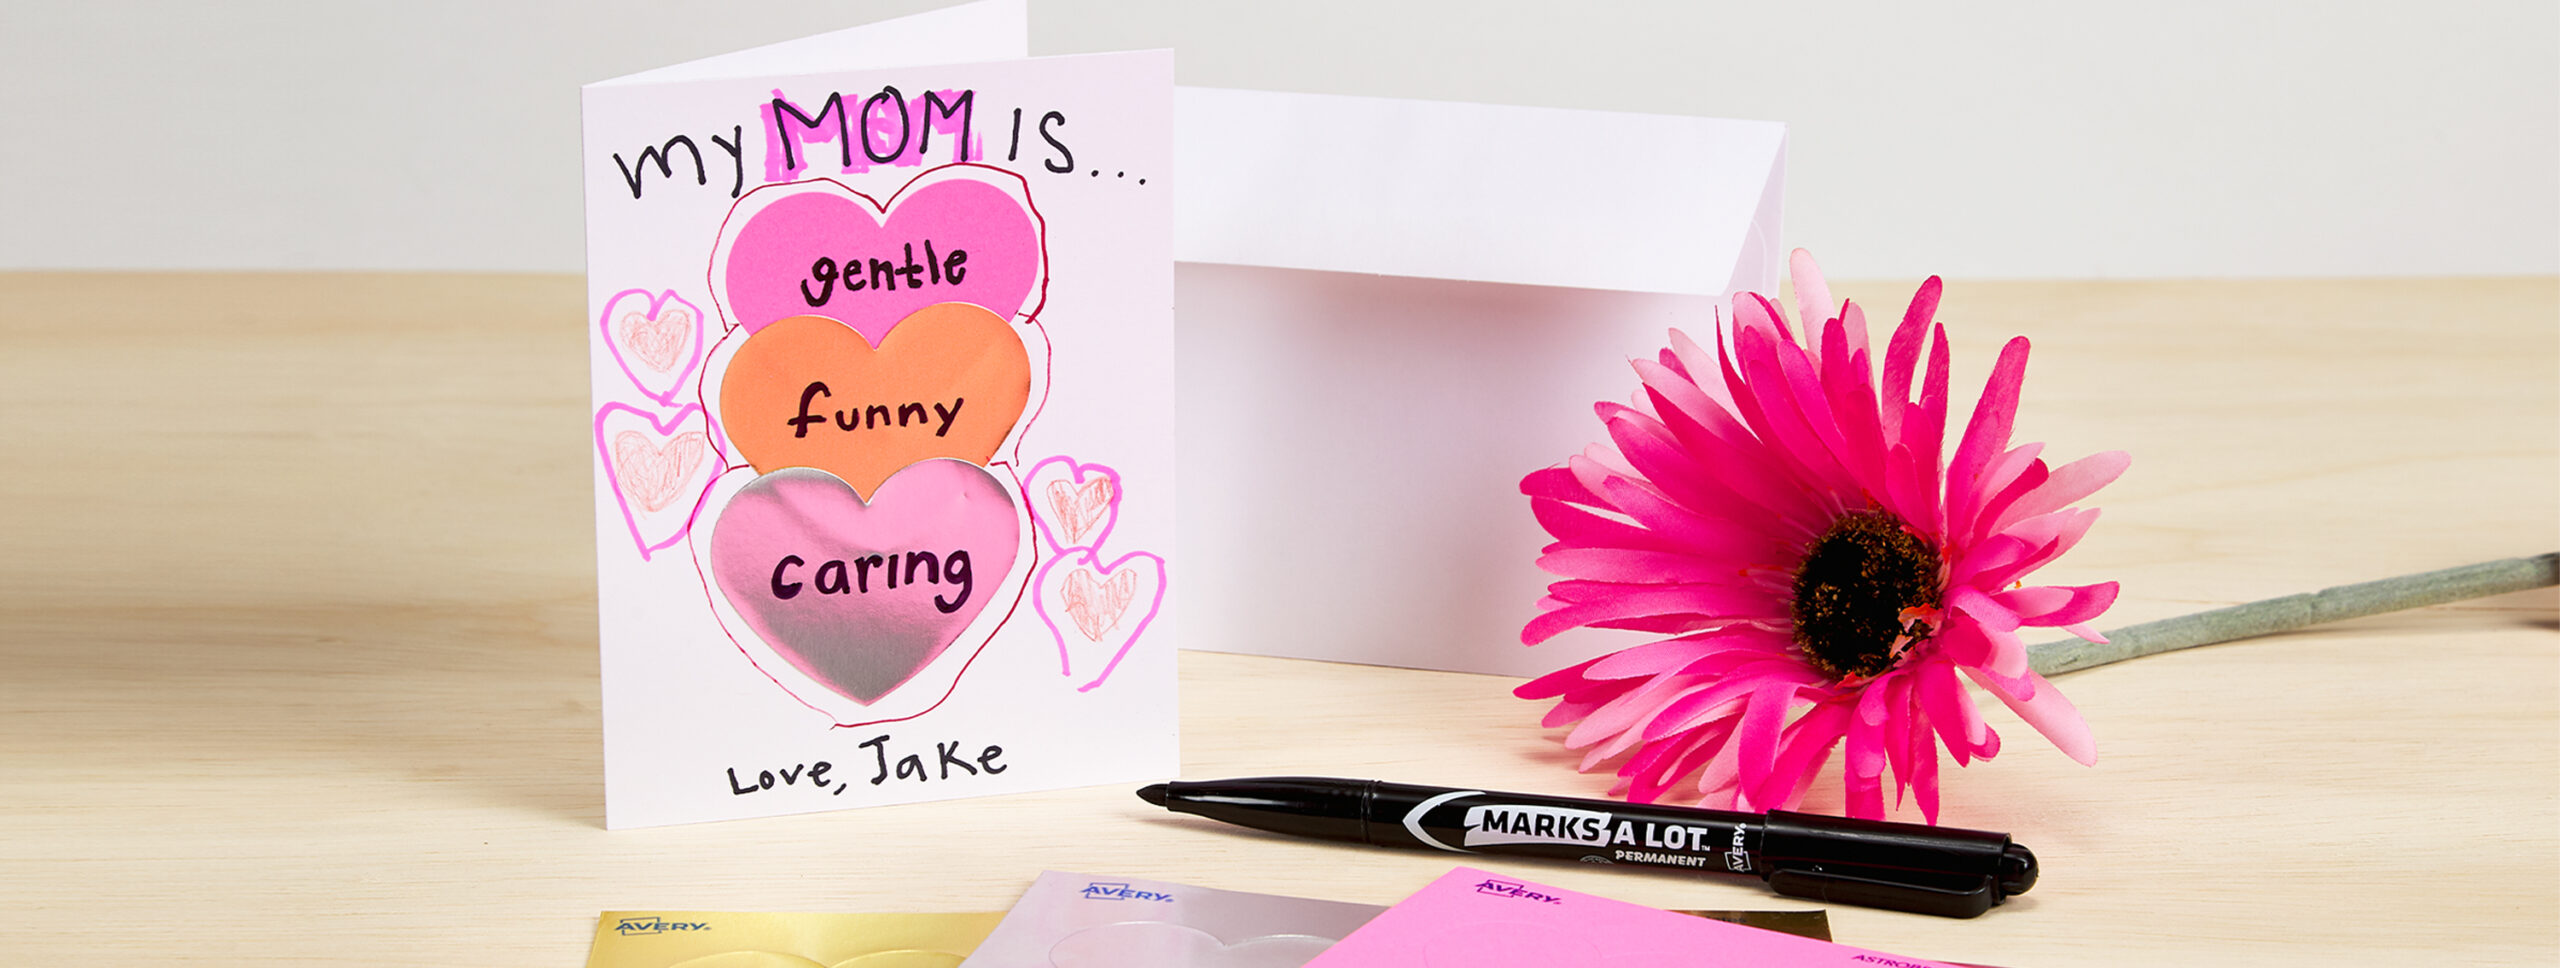 https://www.avery.com/blog/wp-content/uploads/2020/04/MothersDay_Collage-Banner-1_3000x1134_20200421-scaled.jpg